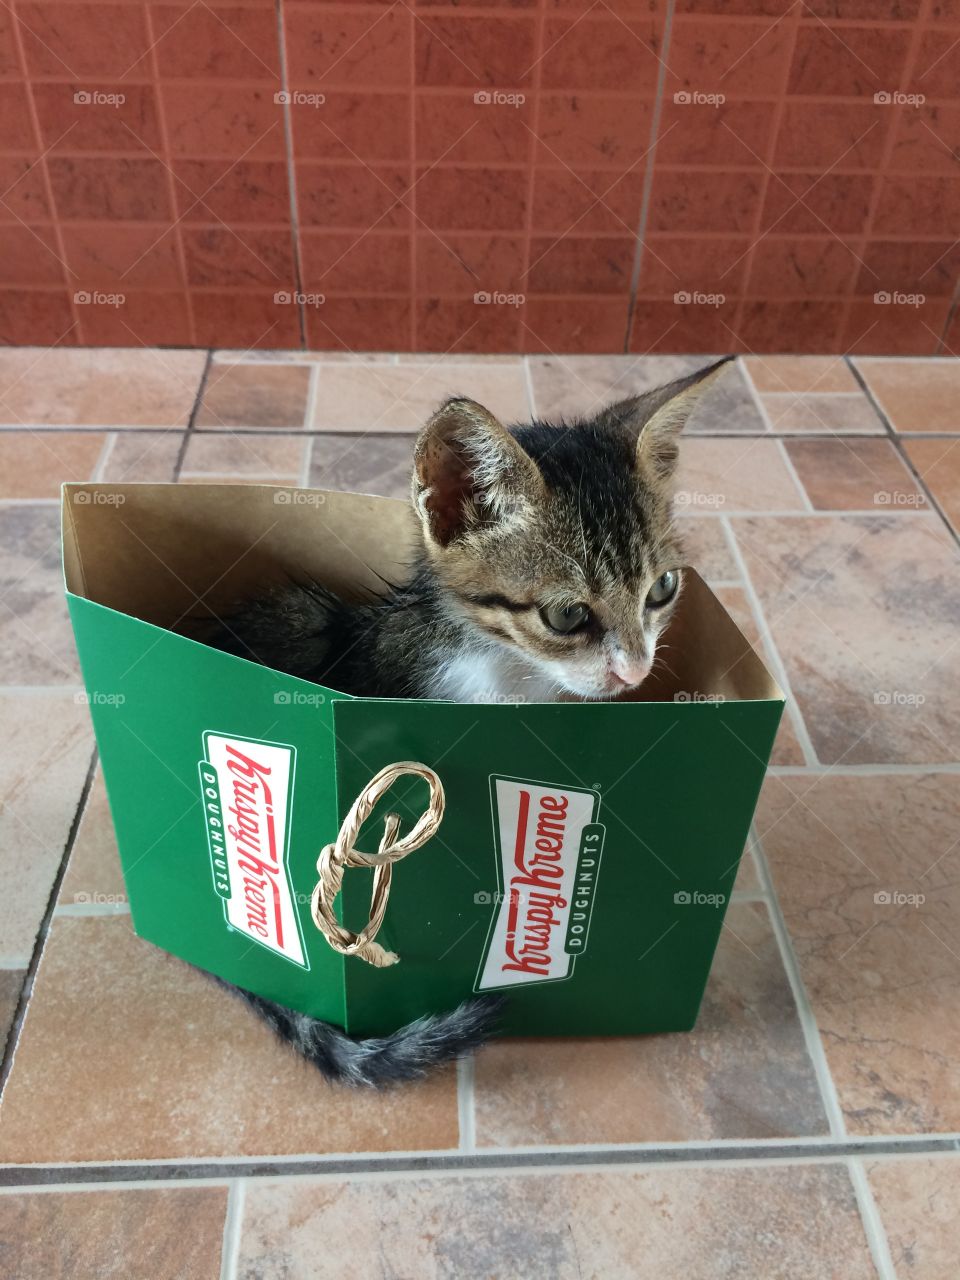 Delicious doughnuts for this cute cat.